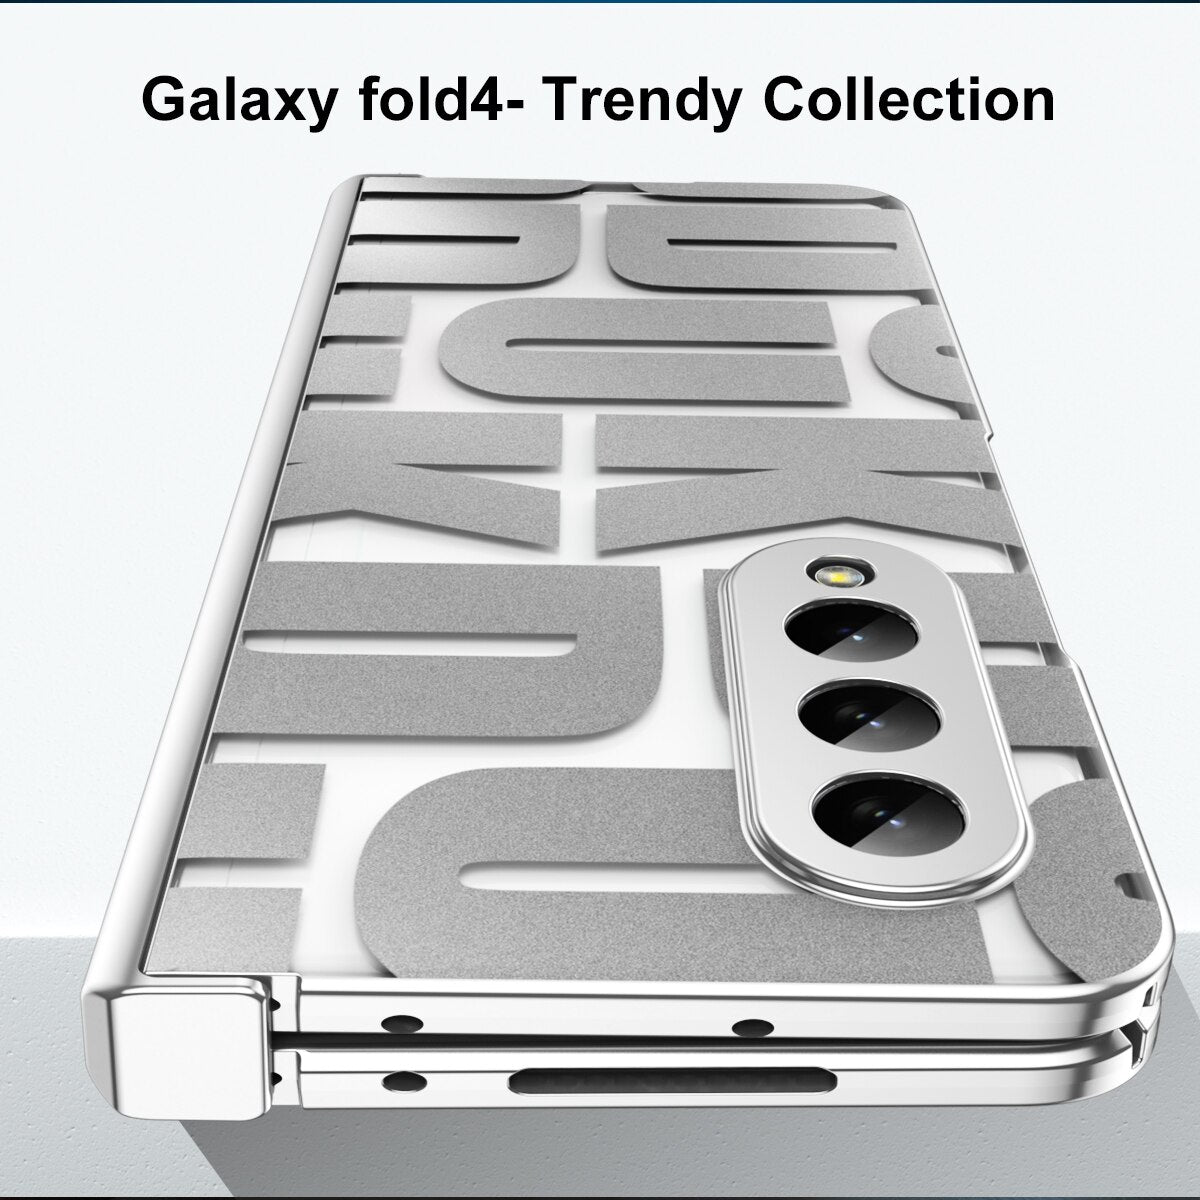 Luxury Transparent Plating Case For Samsung Galaxy Z Fold 5